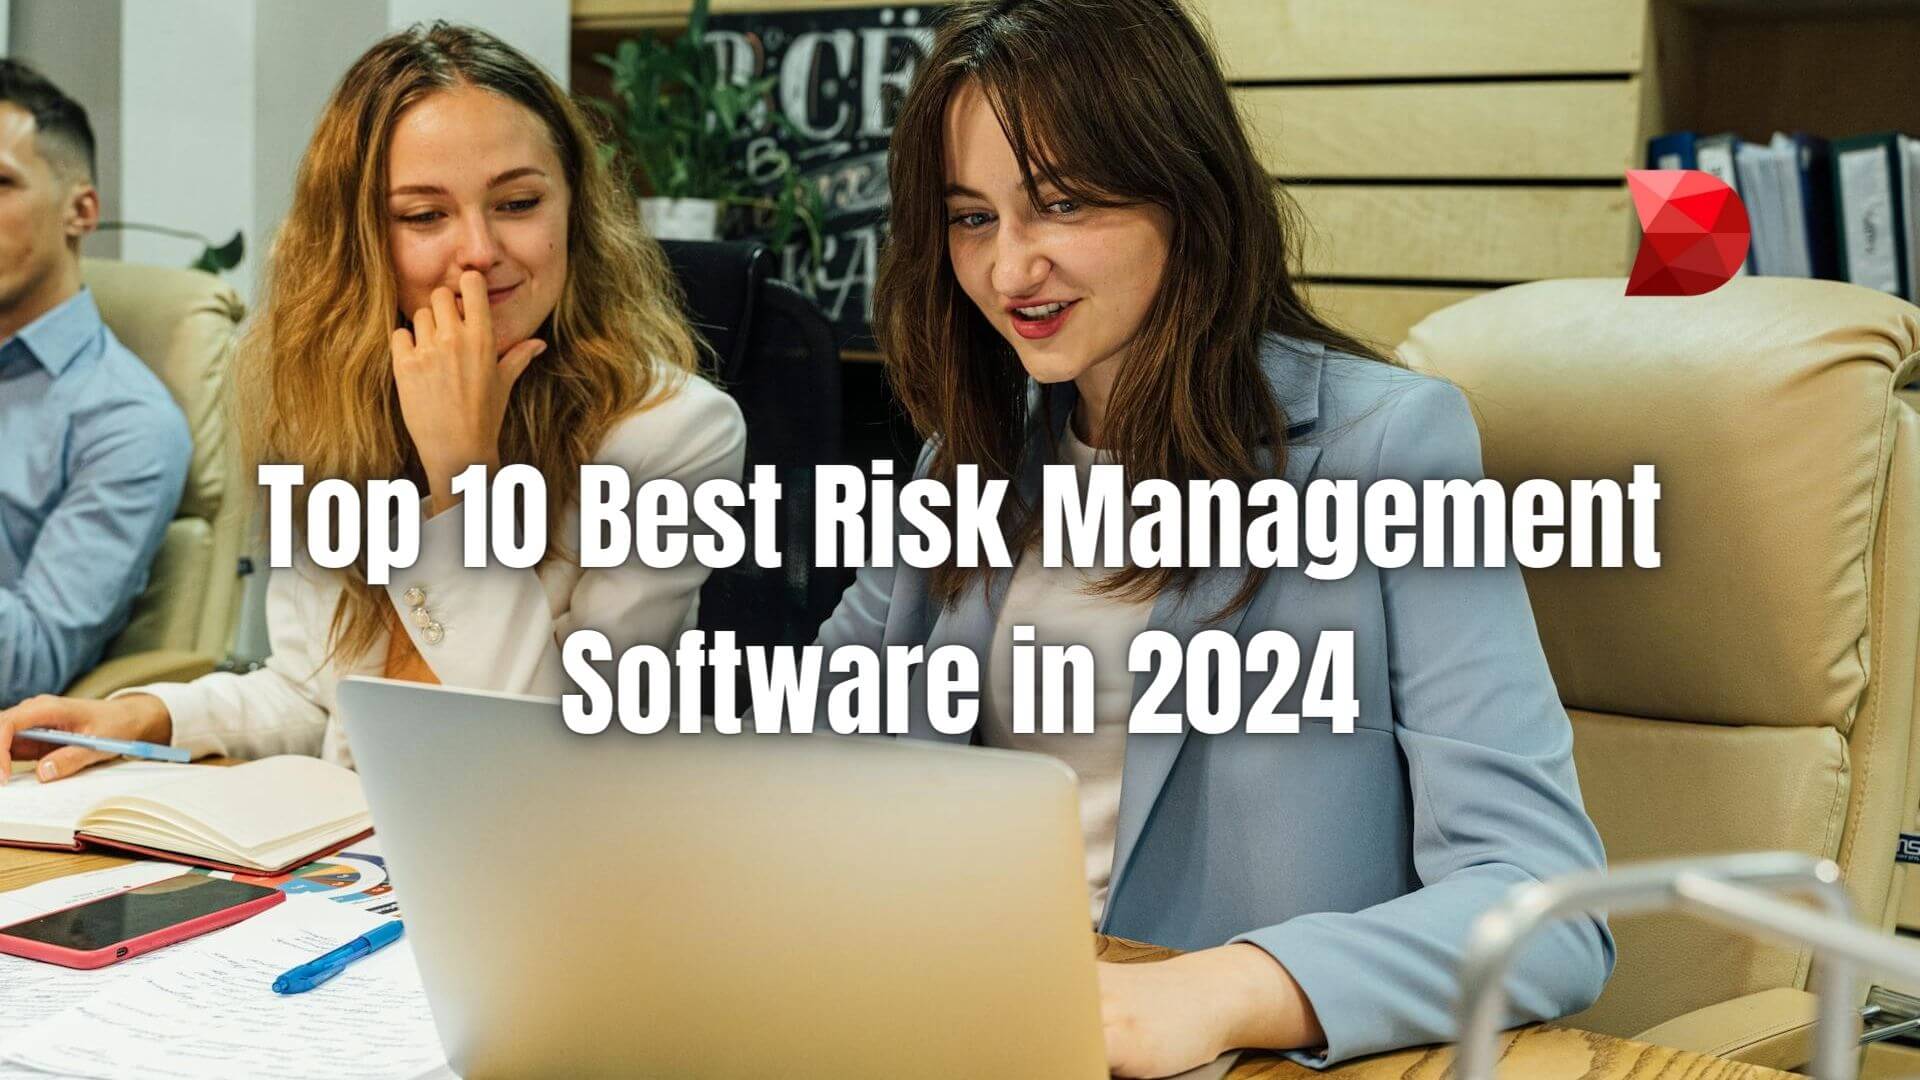 Why risk management software is increasing to a point where it has already become a necessity in today's standards? Read here to learn more!